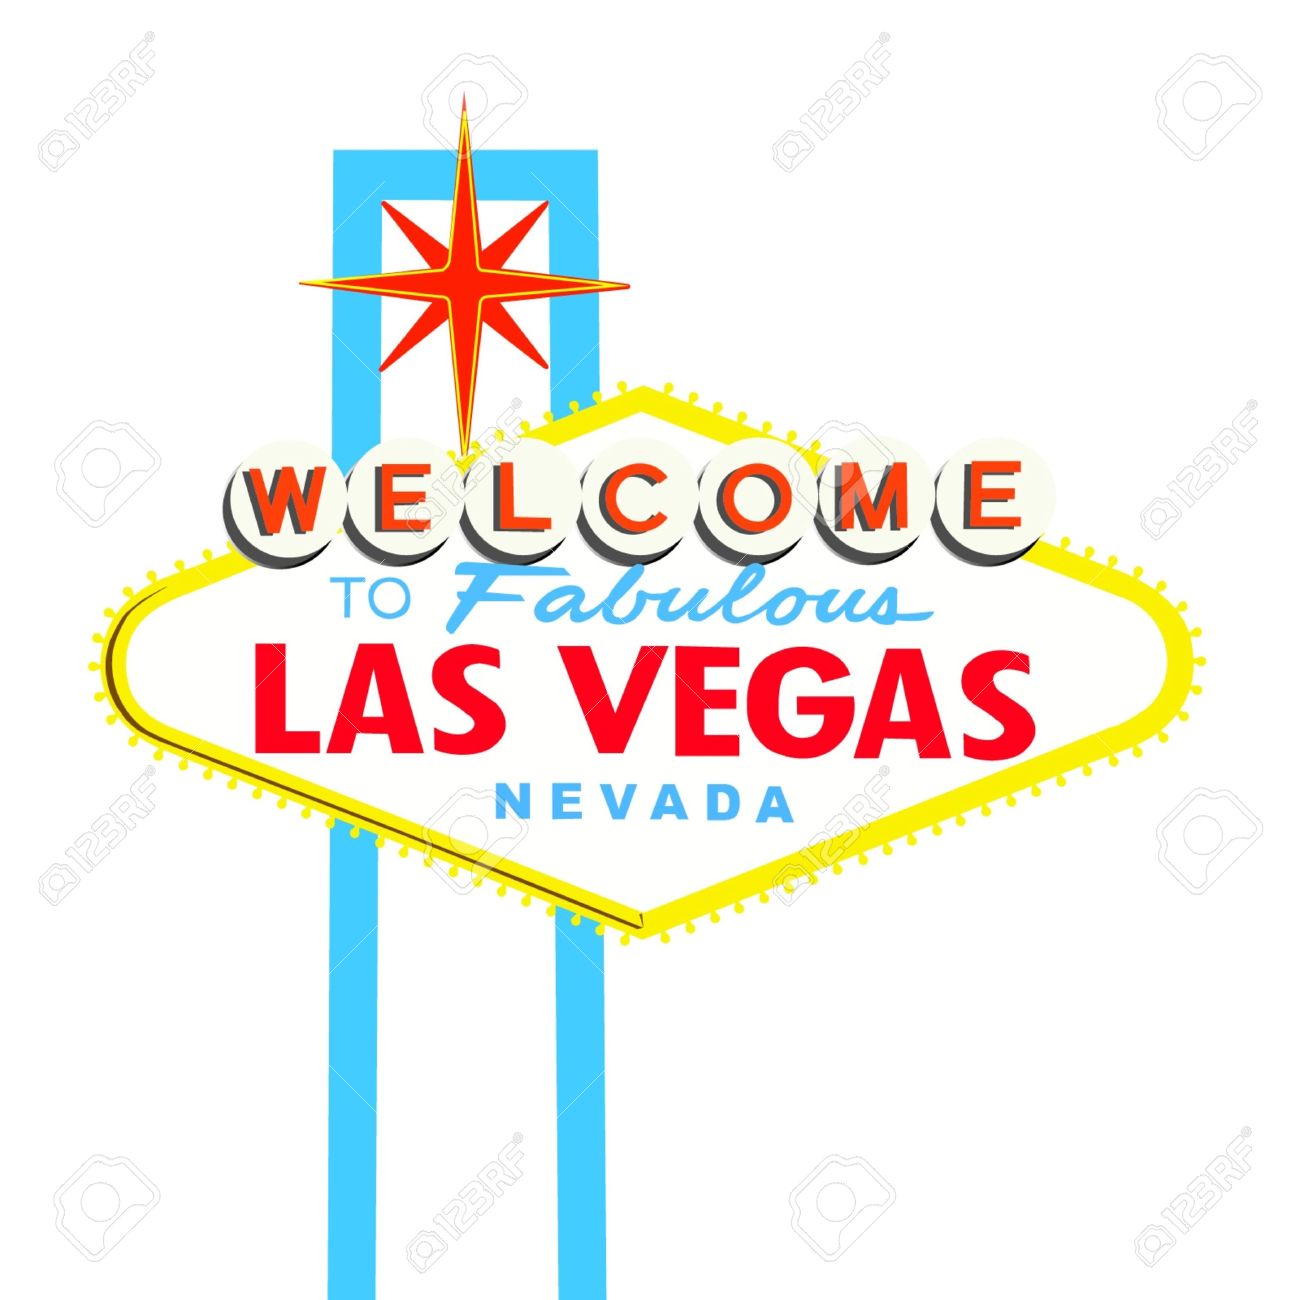 vegas sign: Welcome to Las Vegas Sign on White background